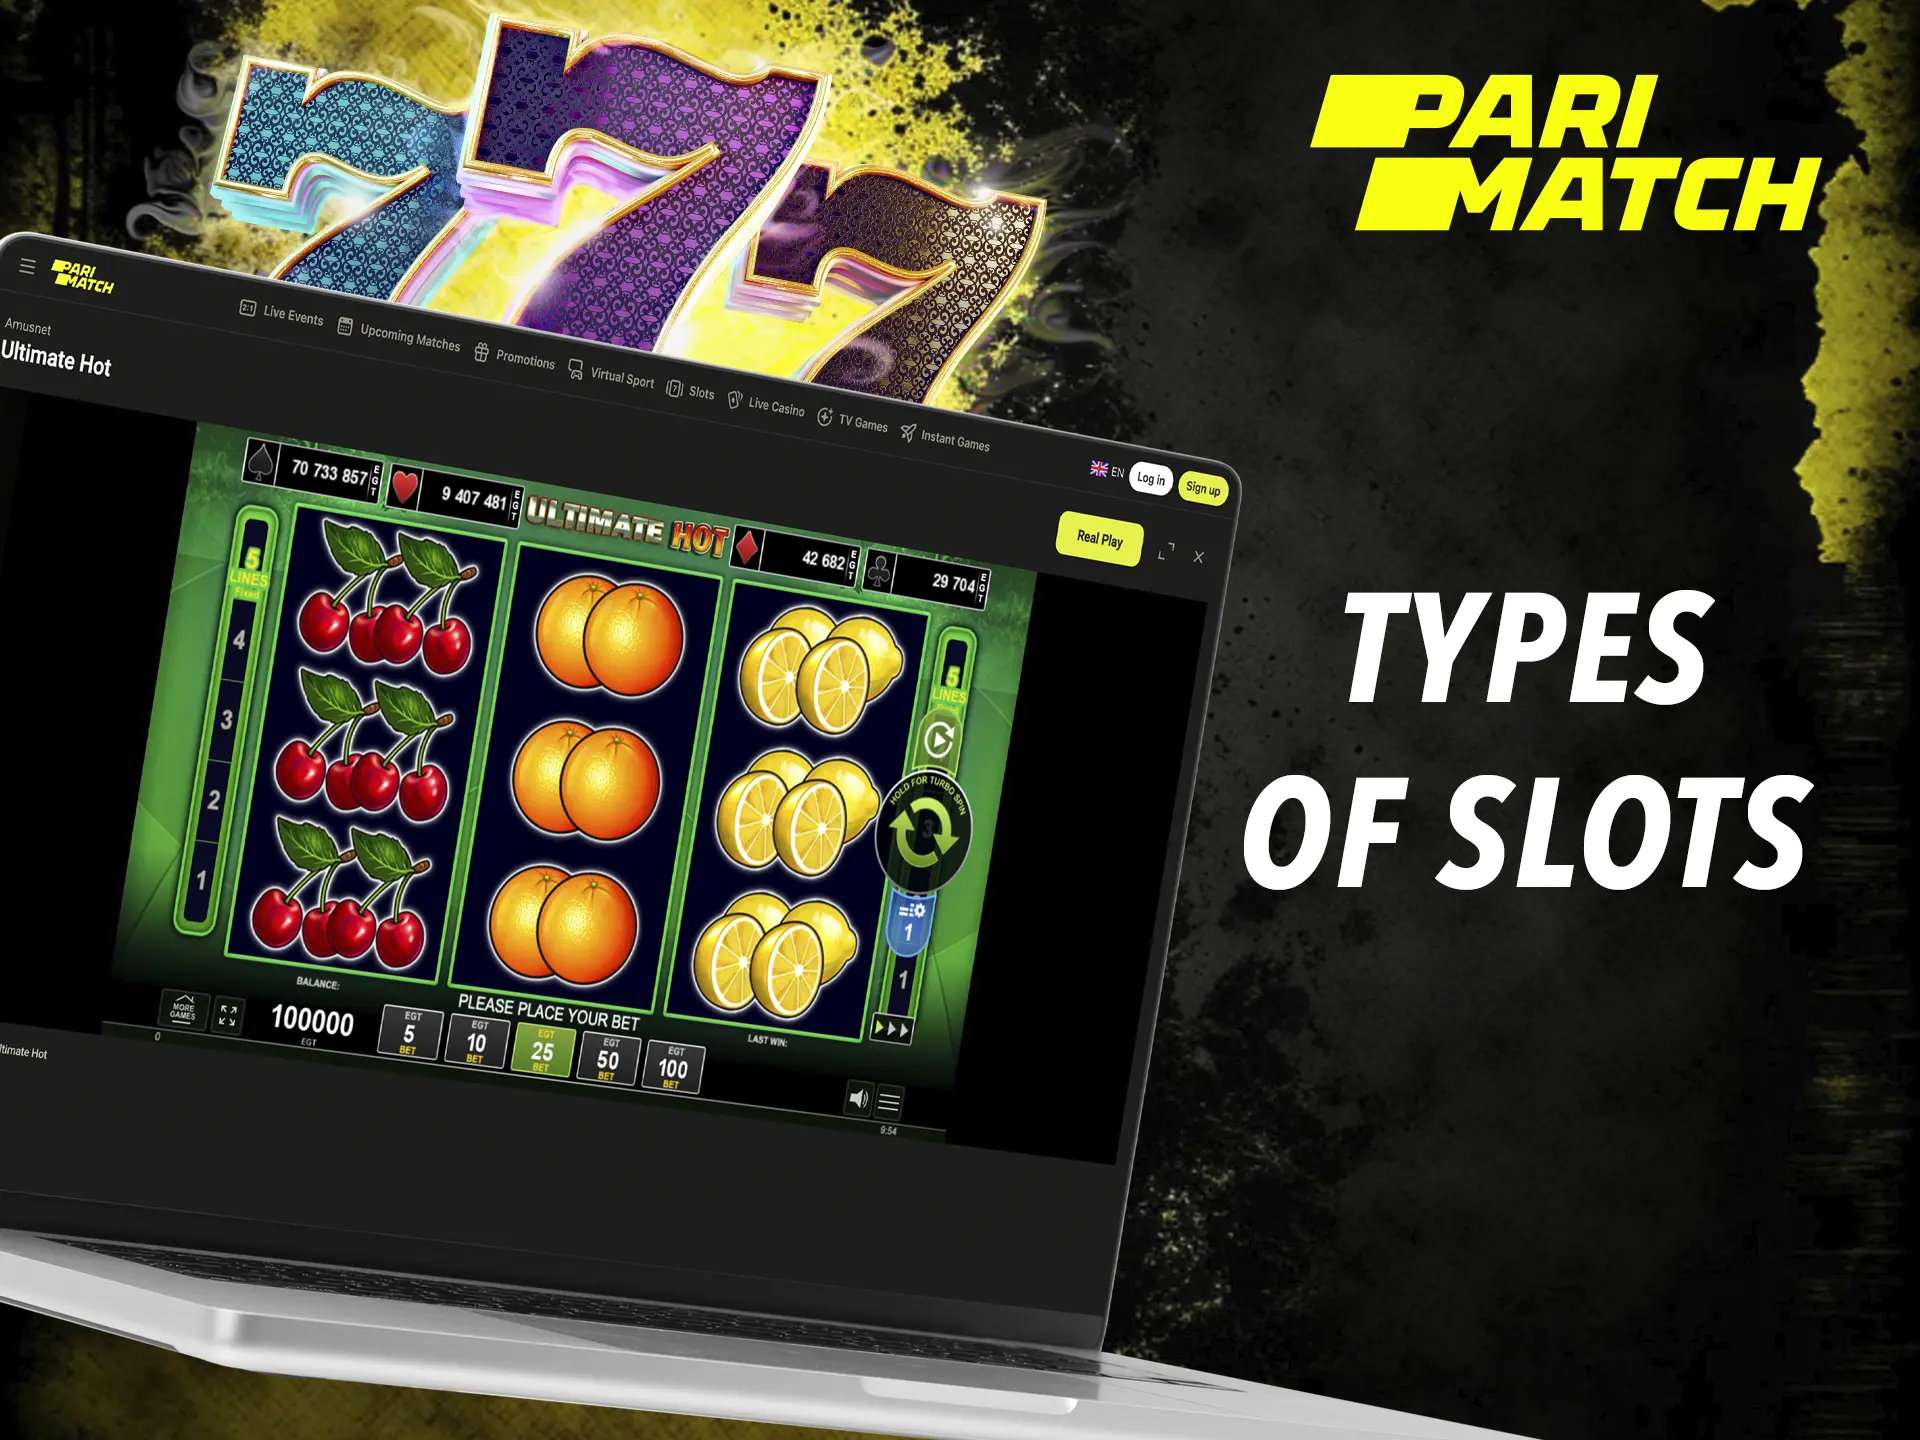 Choose the best slot for you at Parimatch and make a fortune.